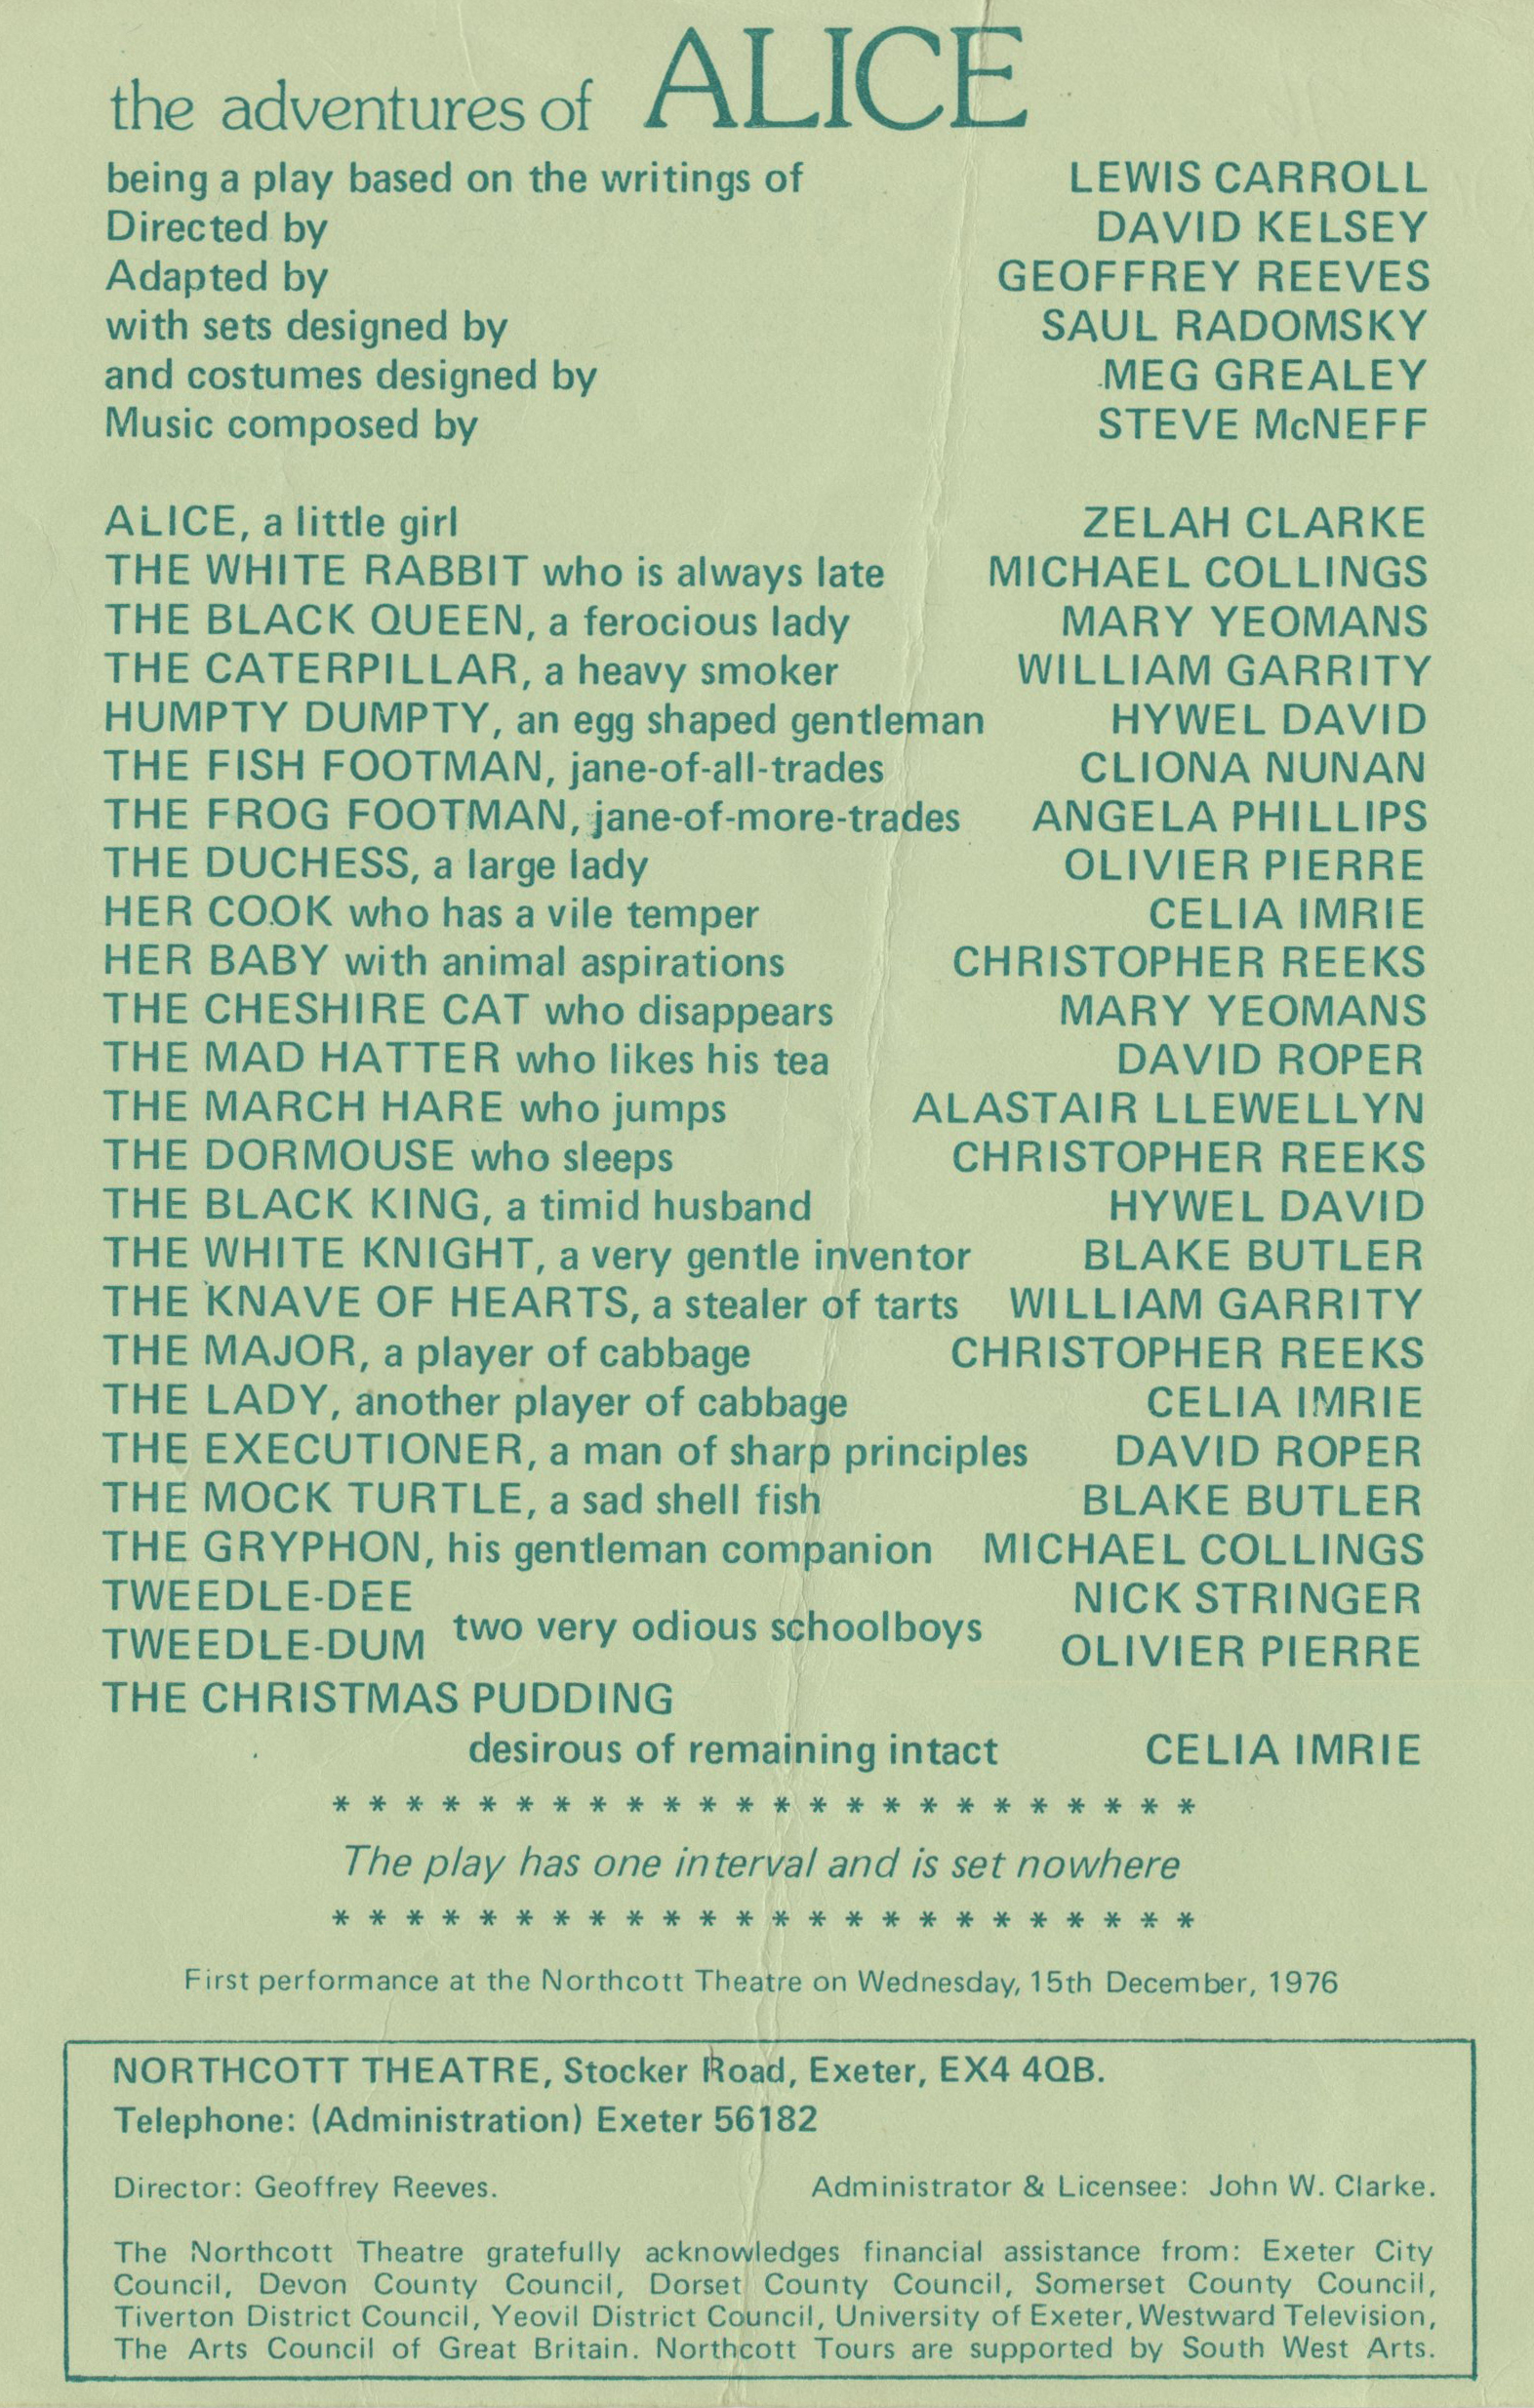 EUL MS 348 - Programme for The Adventures of Alice (1976)